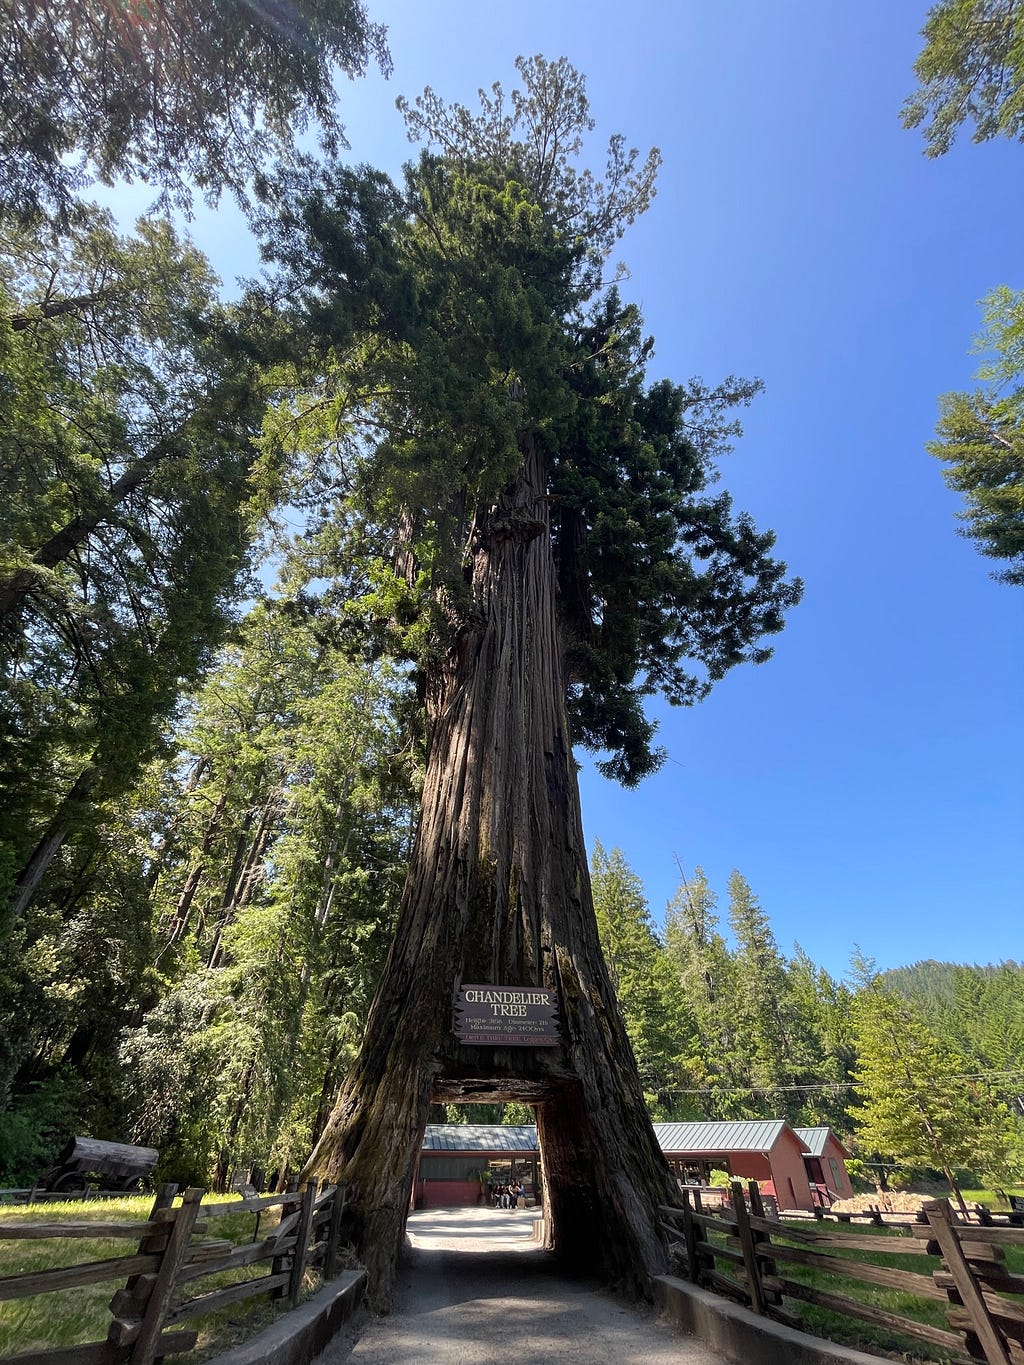 Chandelier Tree — The drive-through tree